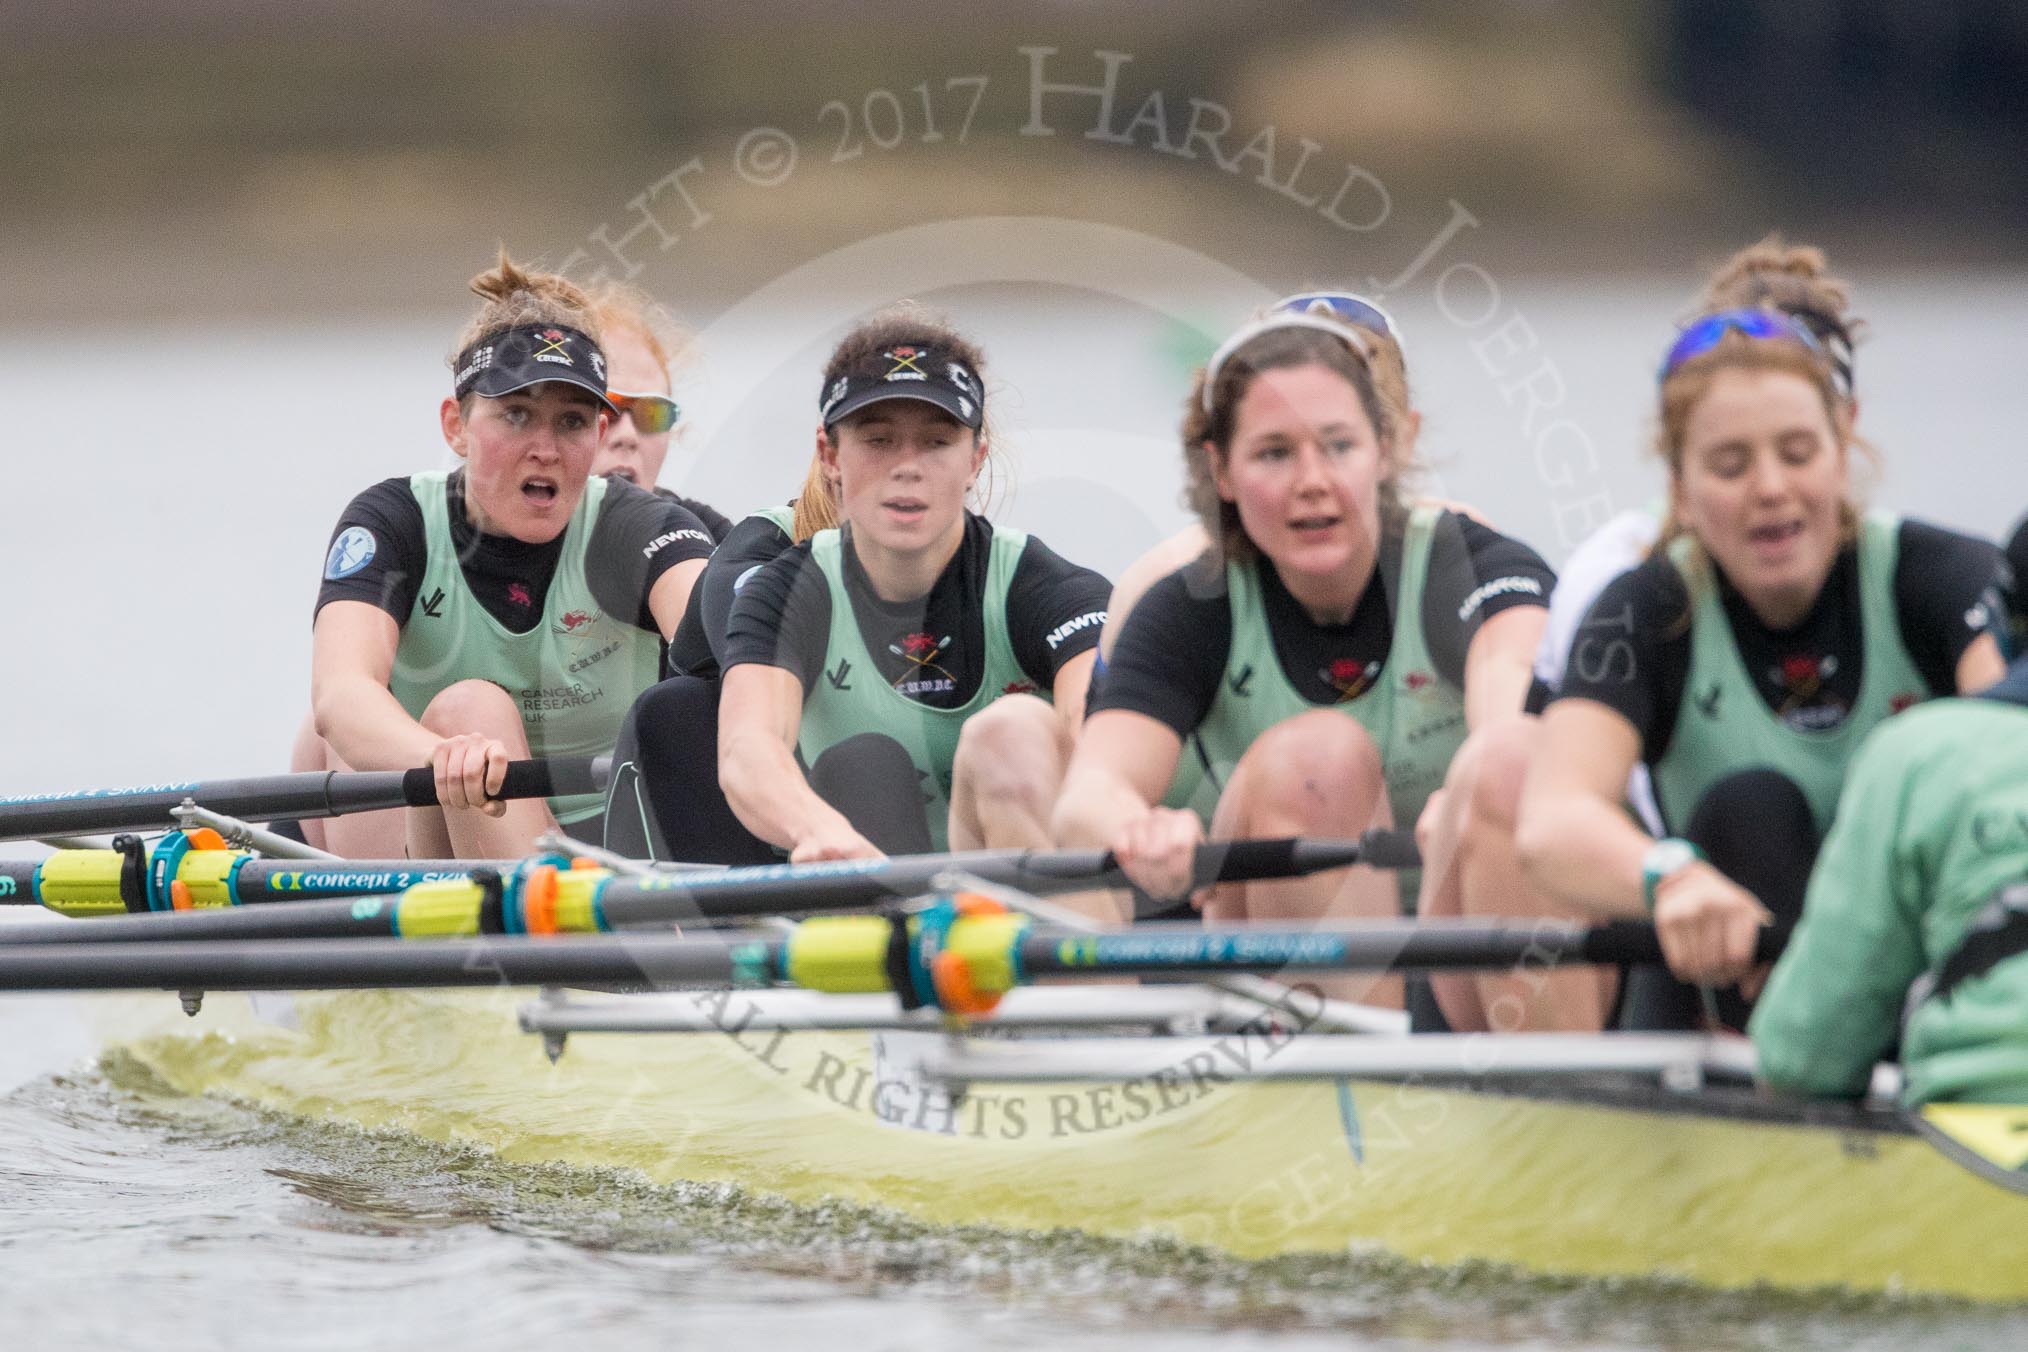 The Boat Race season 2017 - Women's Boat Race Fixture CUWBC vs Univerity of London: The CUWBC after the start of the second piece of the fixture, bow - Claire Lambe, 2 - Kirsten Van Fosen, 3 - Ashton Brown, 4 - Imogen Grant, 5 - Holy Hill, 6 - Melissa Wilson, 7 - Myriam Goudet, stroke - Alice White, cox - Matthew Holland.
River Thames between Putney Bridge and Mortlake,
London SW15,

United Kingdom,
on 19 February 2017 at 16:22, image #126